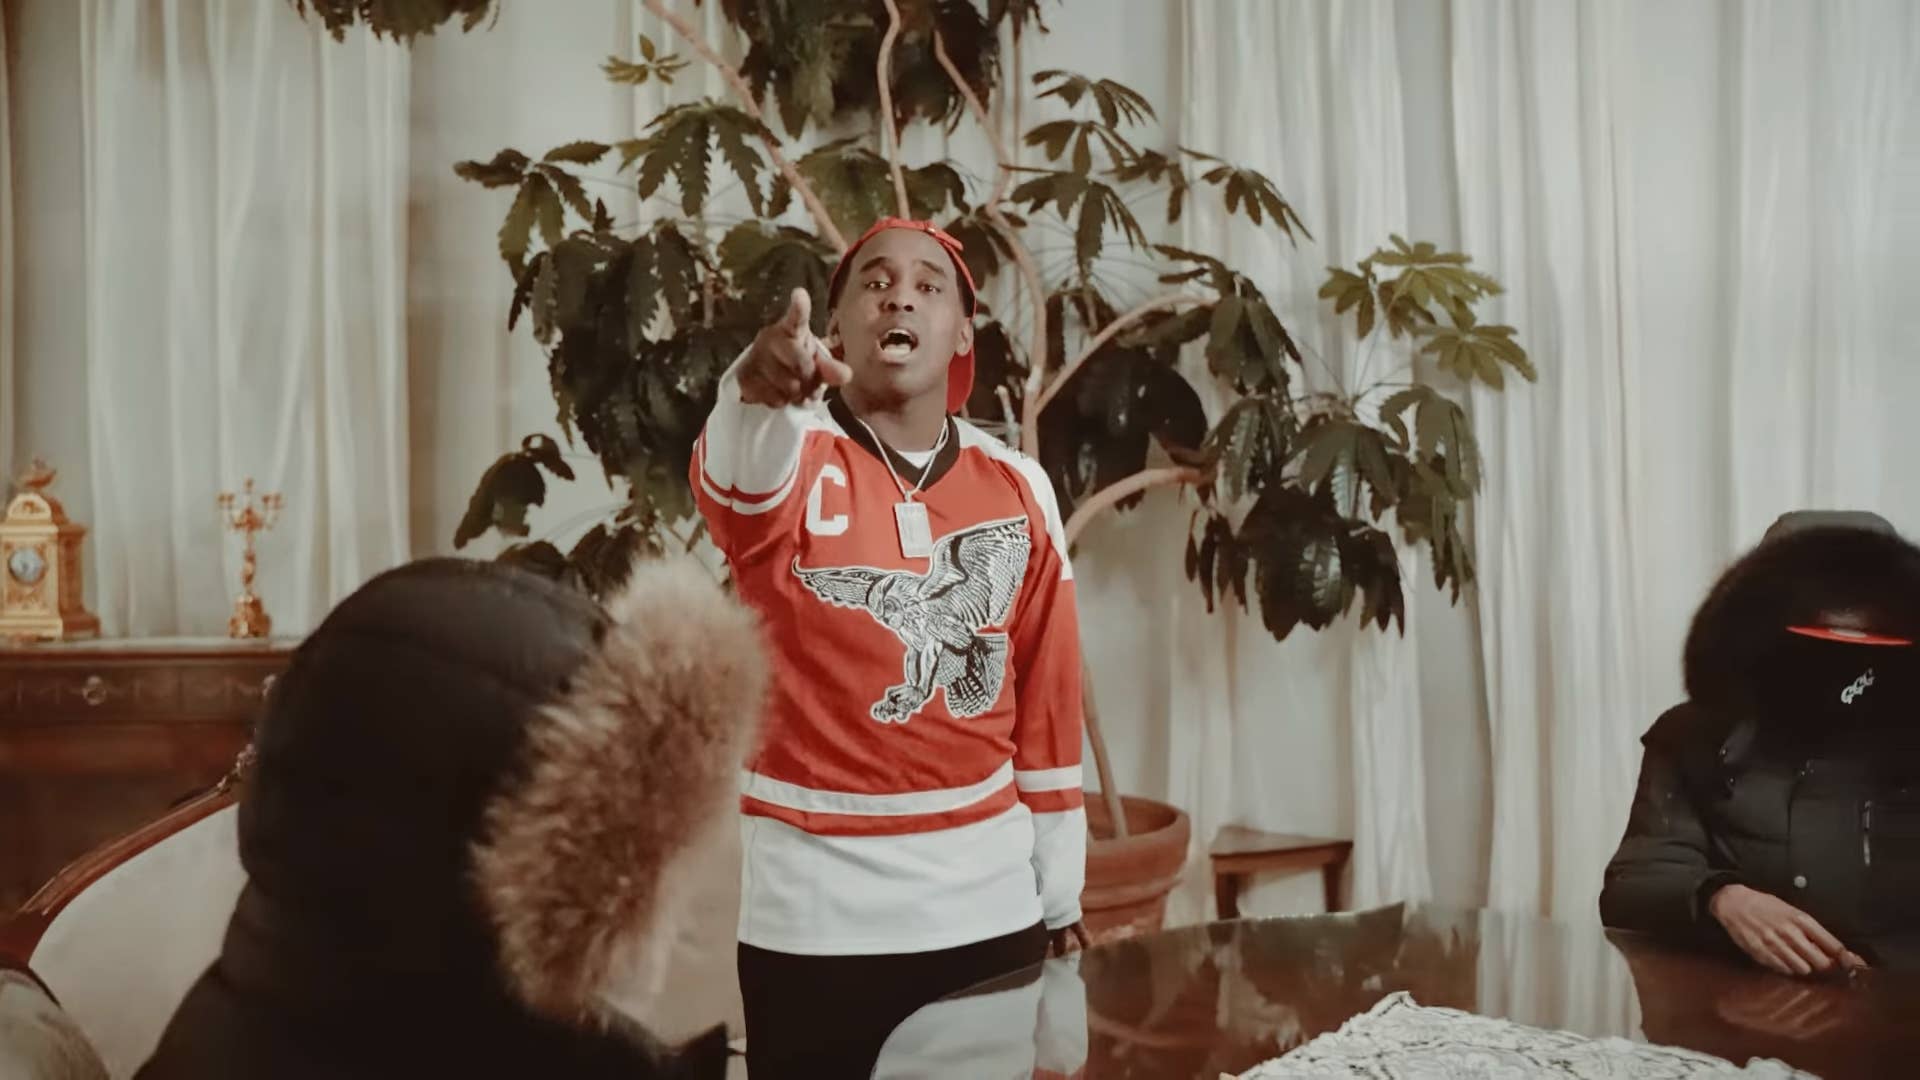 Toronto rapper Top5 in new music video "Movie"